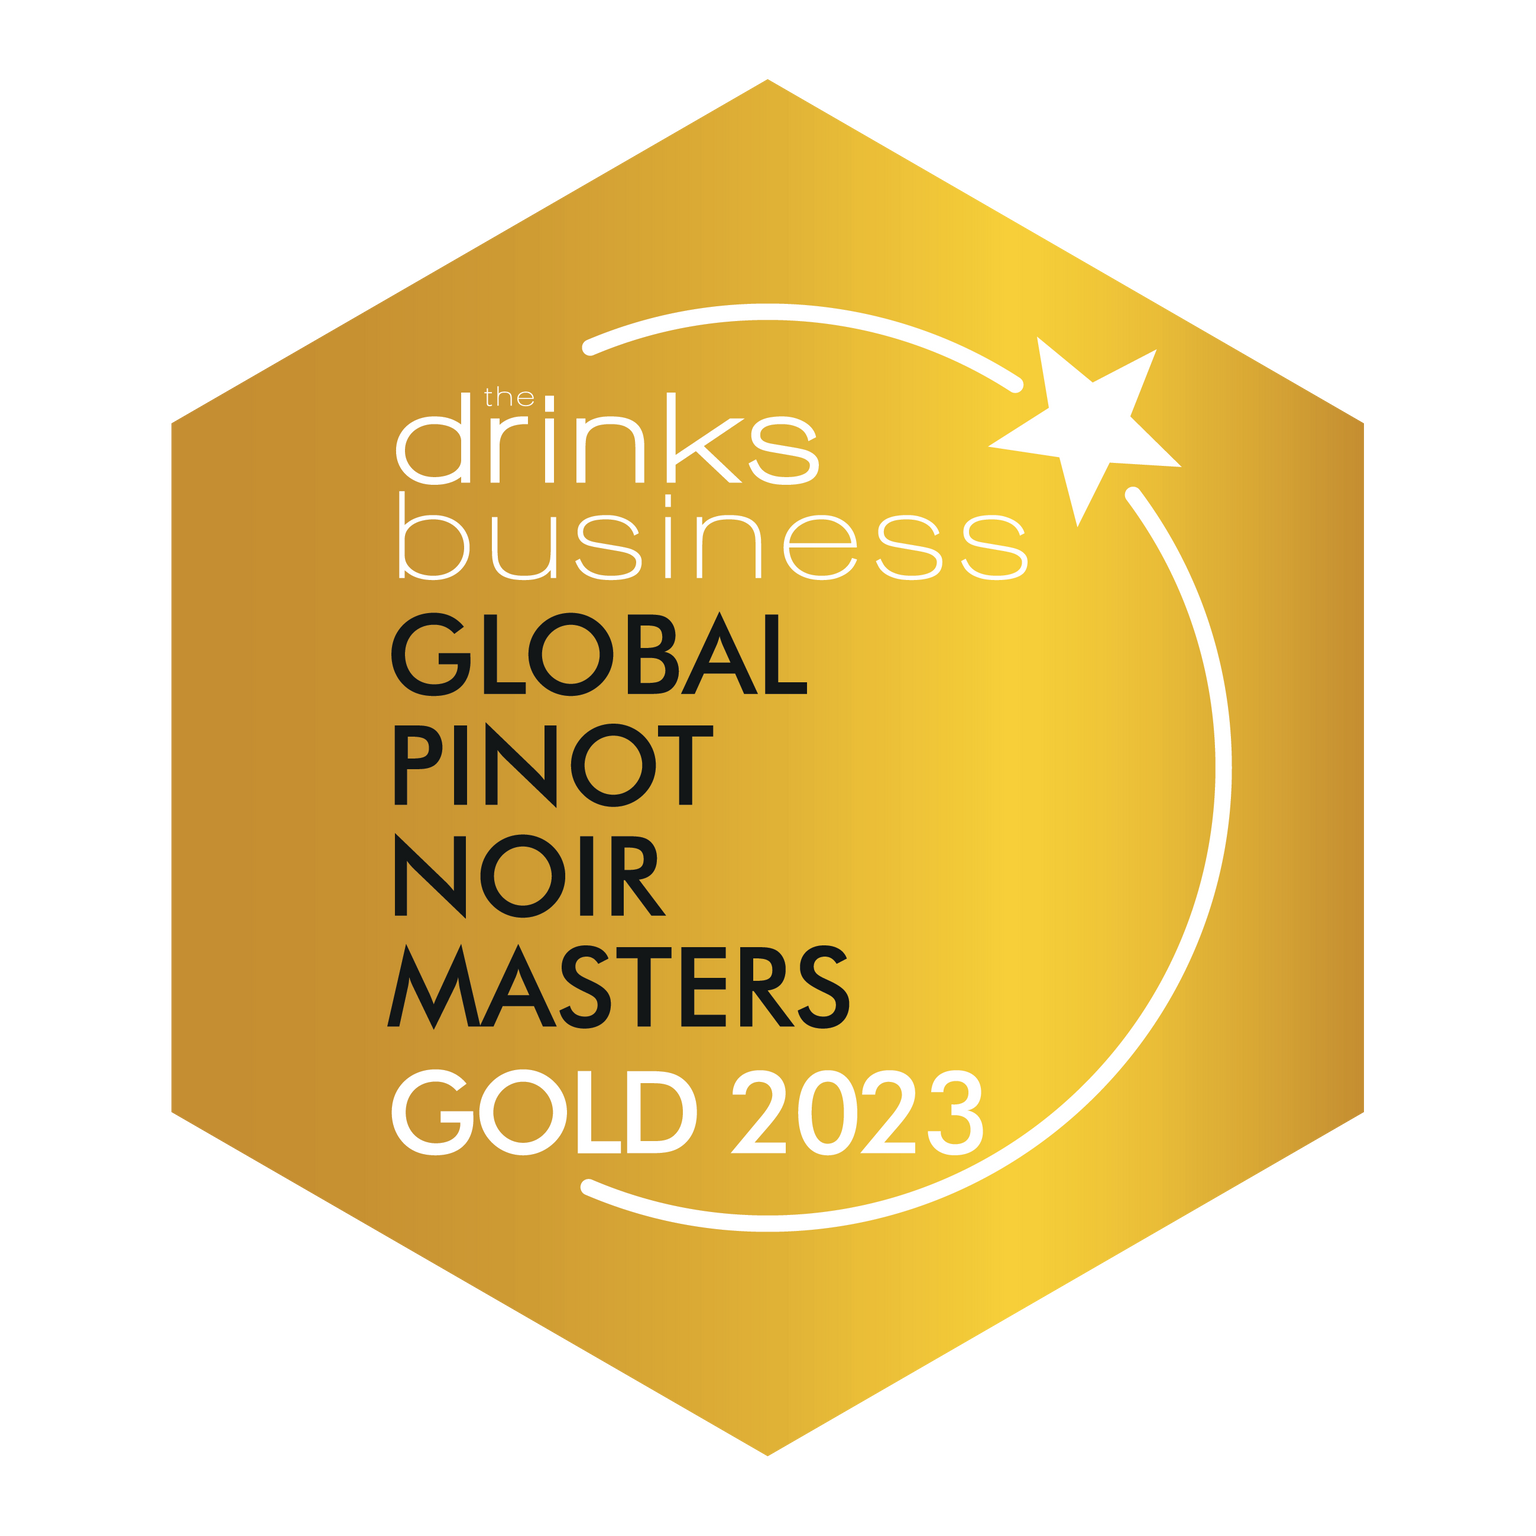 Pinot-Noir-Masters-2023-Medal-GOLD.png